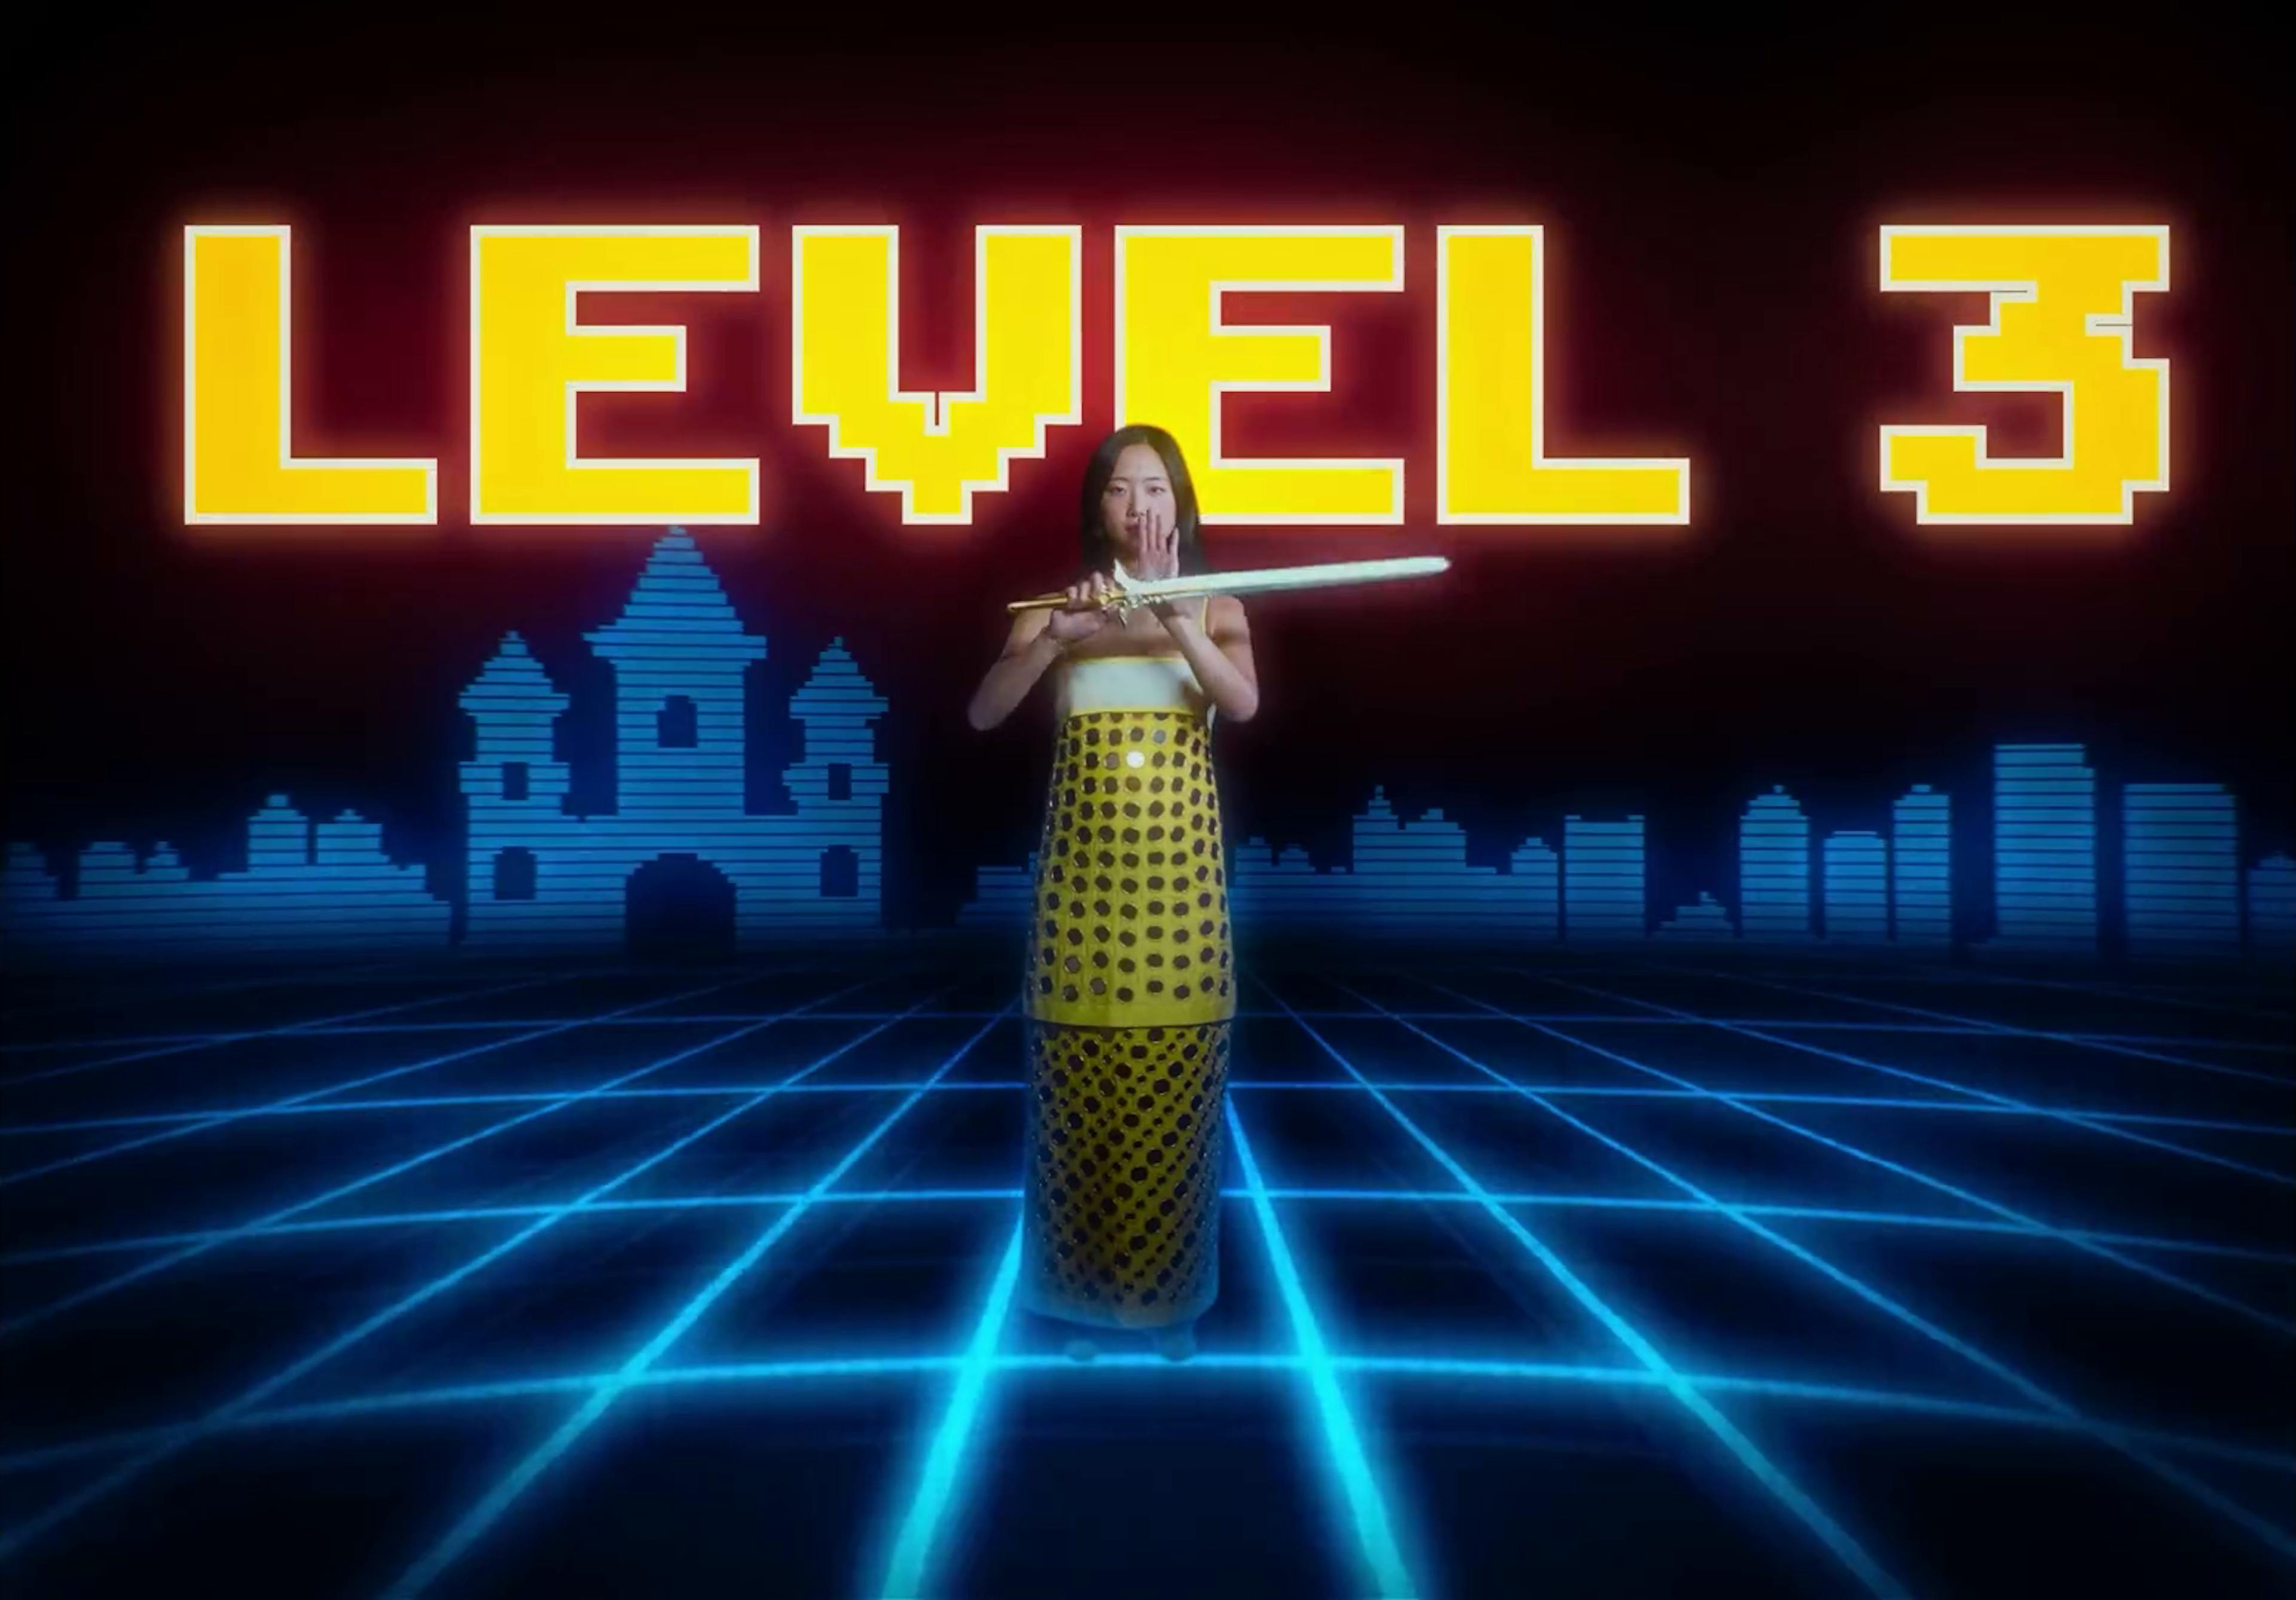 Sarah Kinsley stands centered in a vibrant, retro video game-inspired environment from her music video 'Oh No Darling!'. She's dressed in a traditional yellow garment with black polka dots, holding a sword horizontally in front of her. The backdrop features large, pixelated yellow letters spelling "LEVEL 3", with digital outlines of castles and a cityscape on a grid that glows with neon blue lines, reminiscent of a classic arcade game setting.